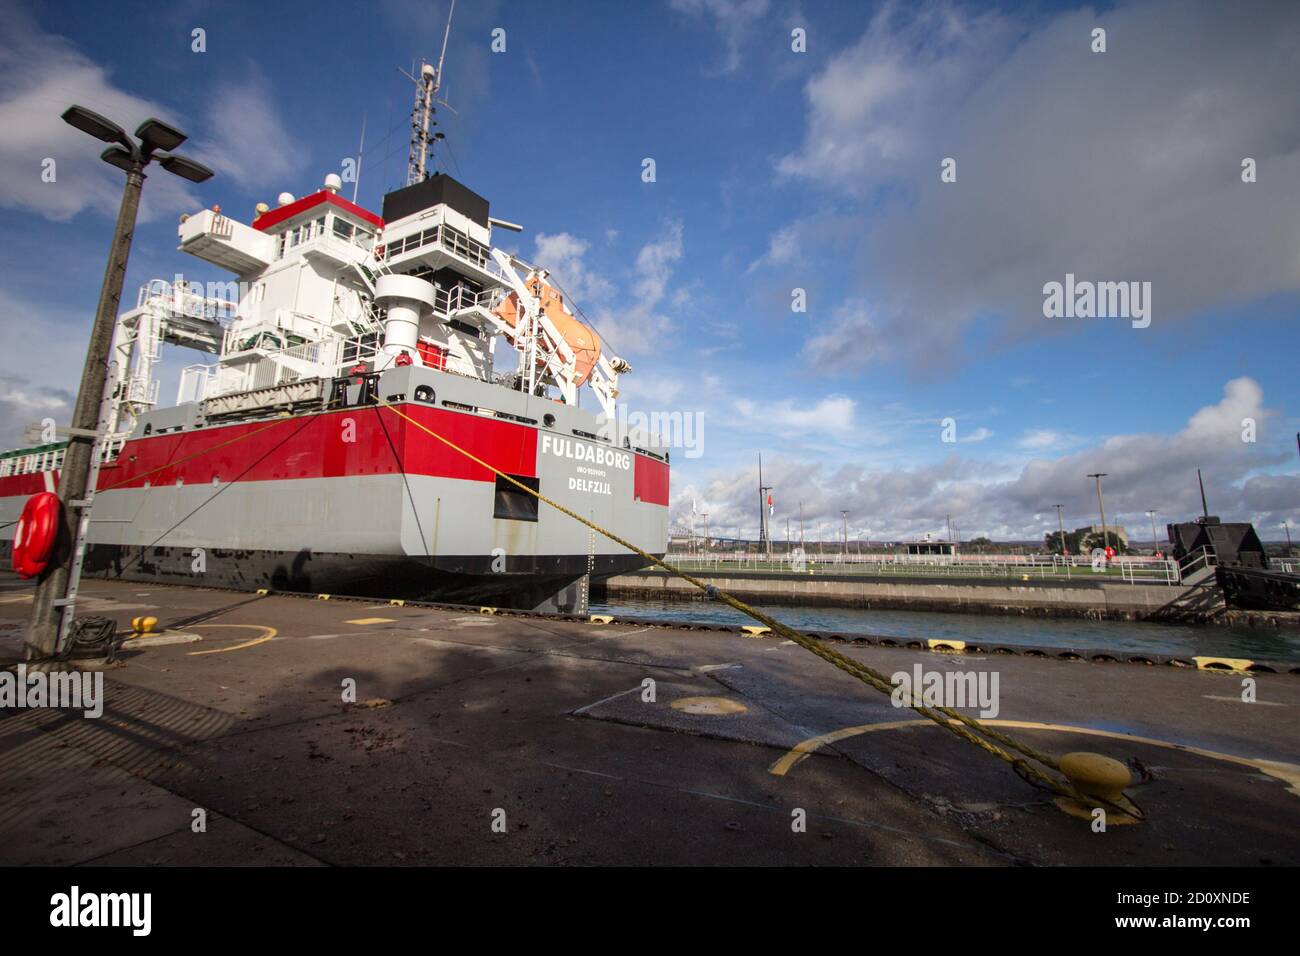 Sault Ste Marie, Michigan, USA -  Ocean freighter the Fuldaborg sails through the Soo Locks at tourists watch from the shore. Stock Photo